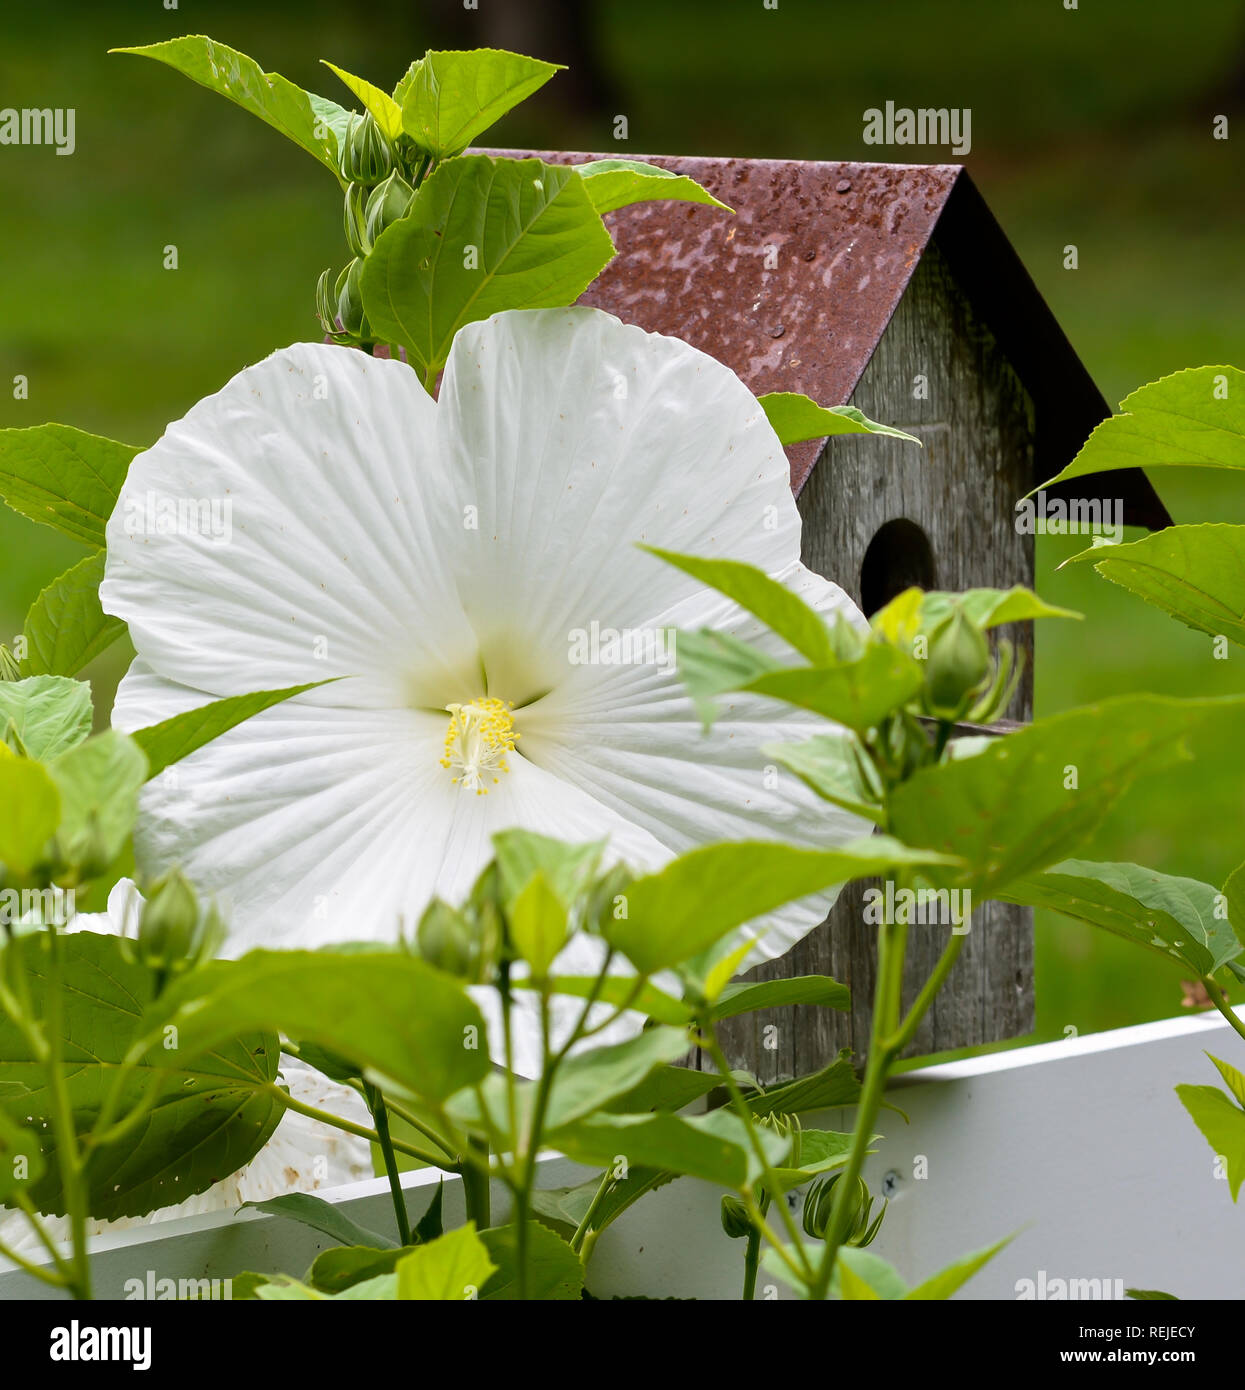 Close Up of Hibiscus Flower with Birdhouse on Fence, with selective focus on Flower. Stock Photo